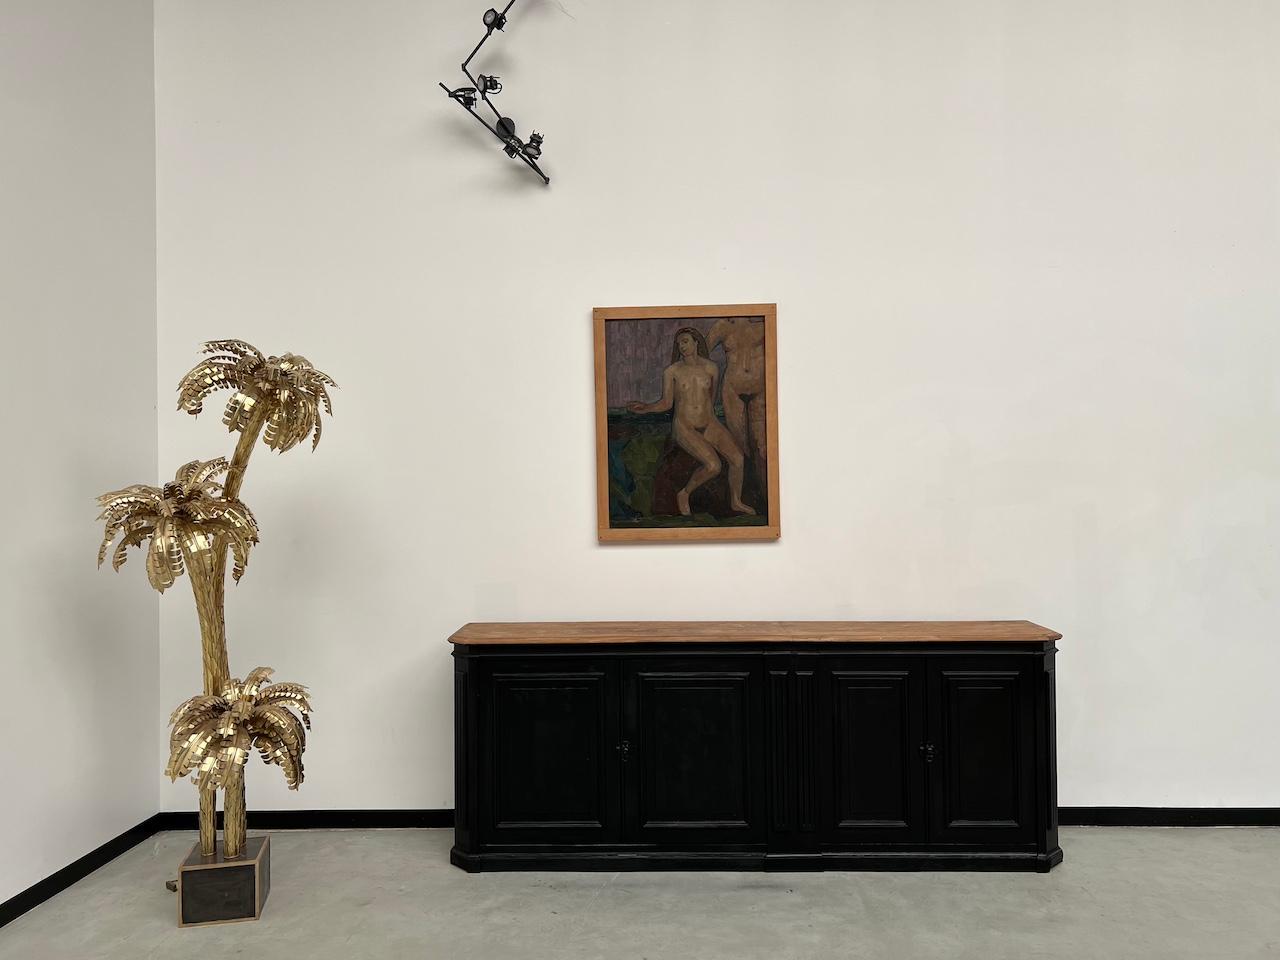 Fully restored 1900s pine sideboard
We restored this pretty sideboard by painting its facade matte black, and treating and sanding the interior.

Elegant and distinguished, it brings the charm of the old into any interior. Its varnished shelves, in